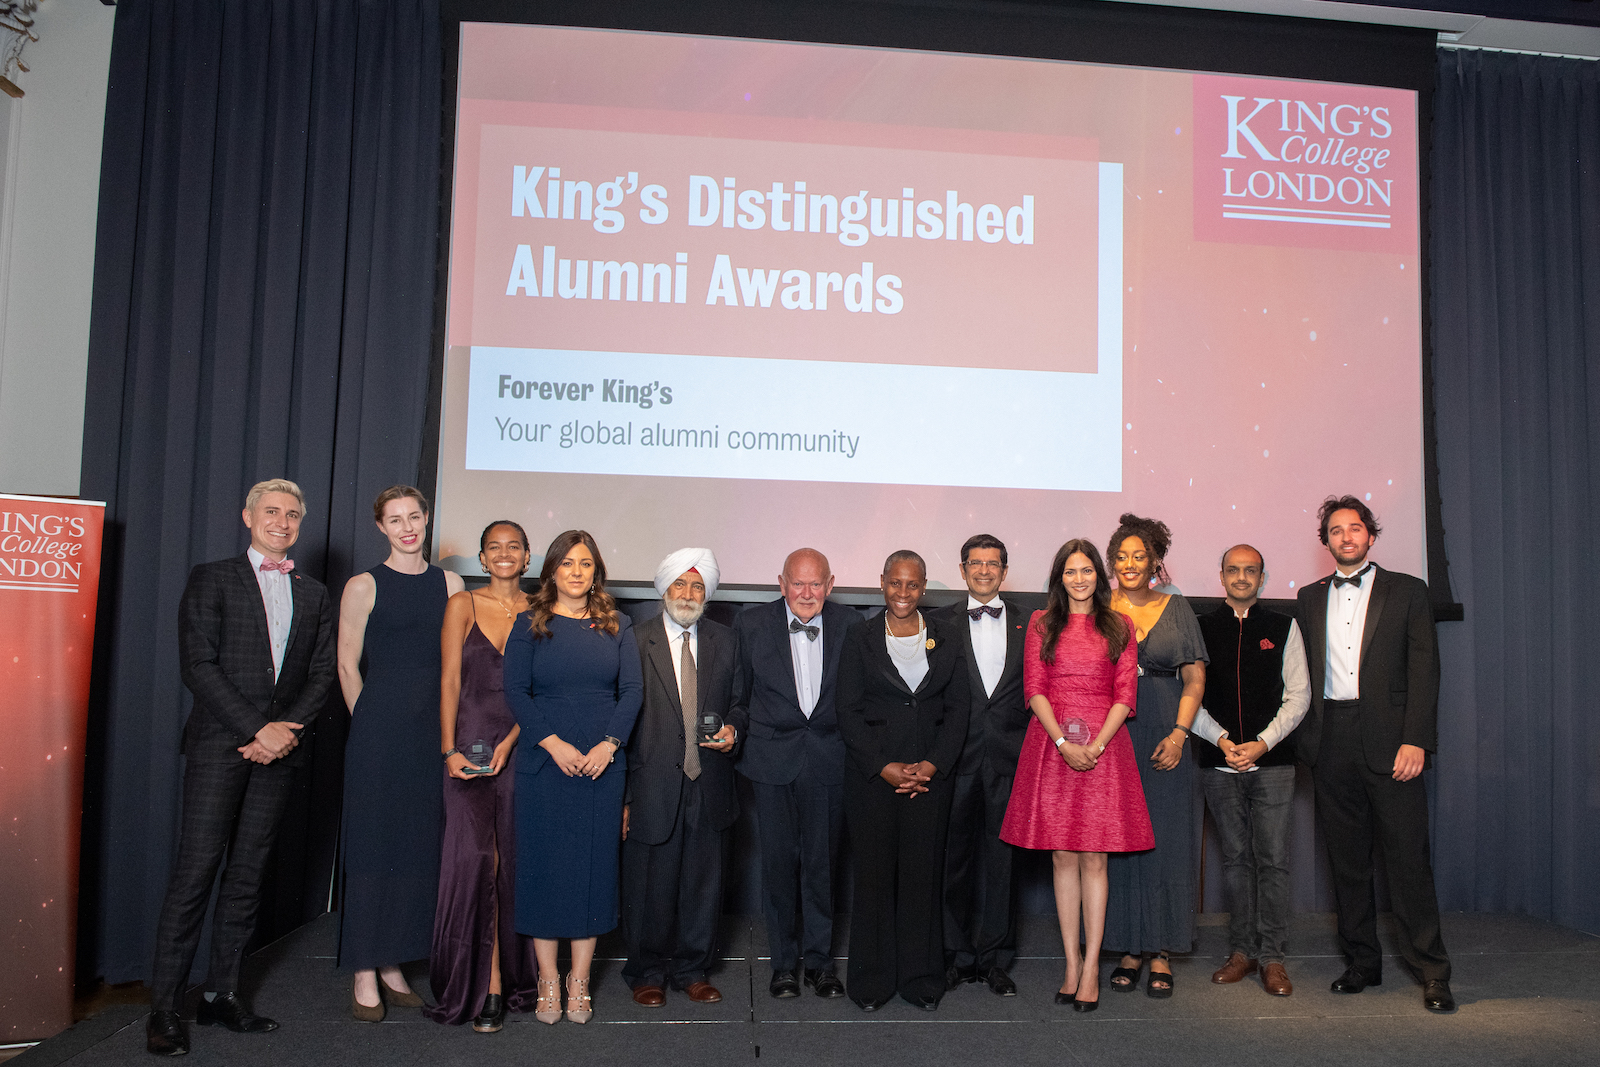 Host and winners of the King’s Distinguished Alumni Awards 2022